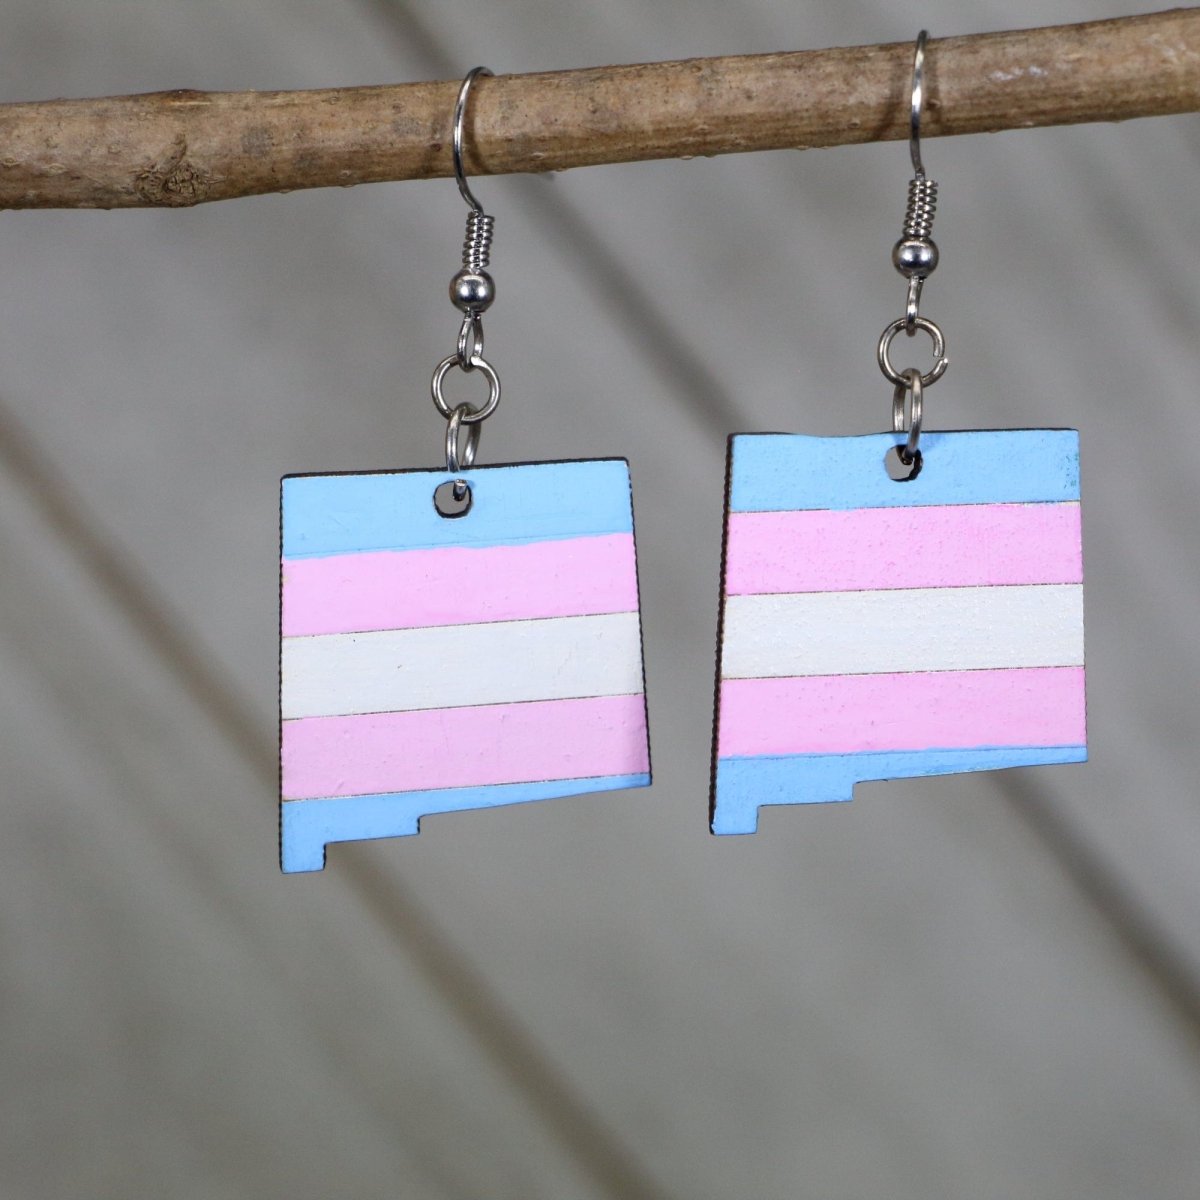 LGBTQIA+ New Mexico Trans Flag Wooden Dangle Earrings - - Cate's Concepts, LLC